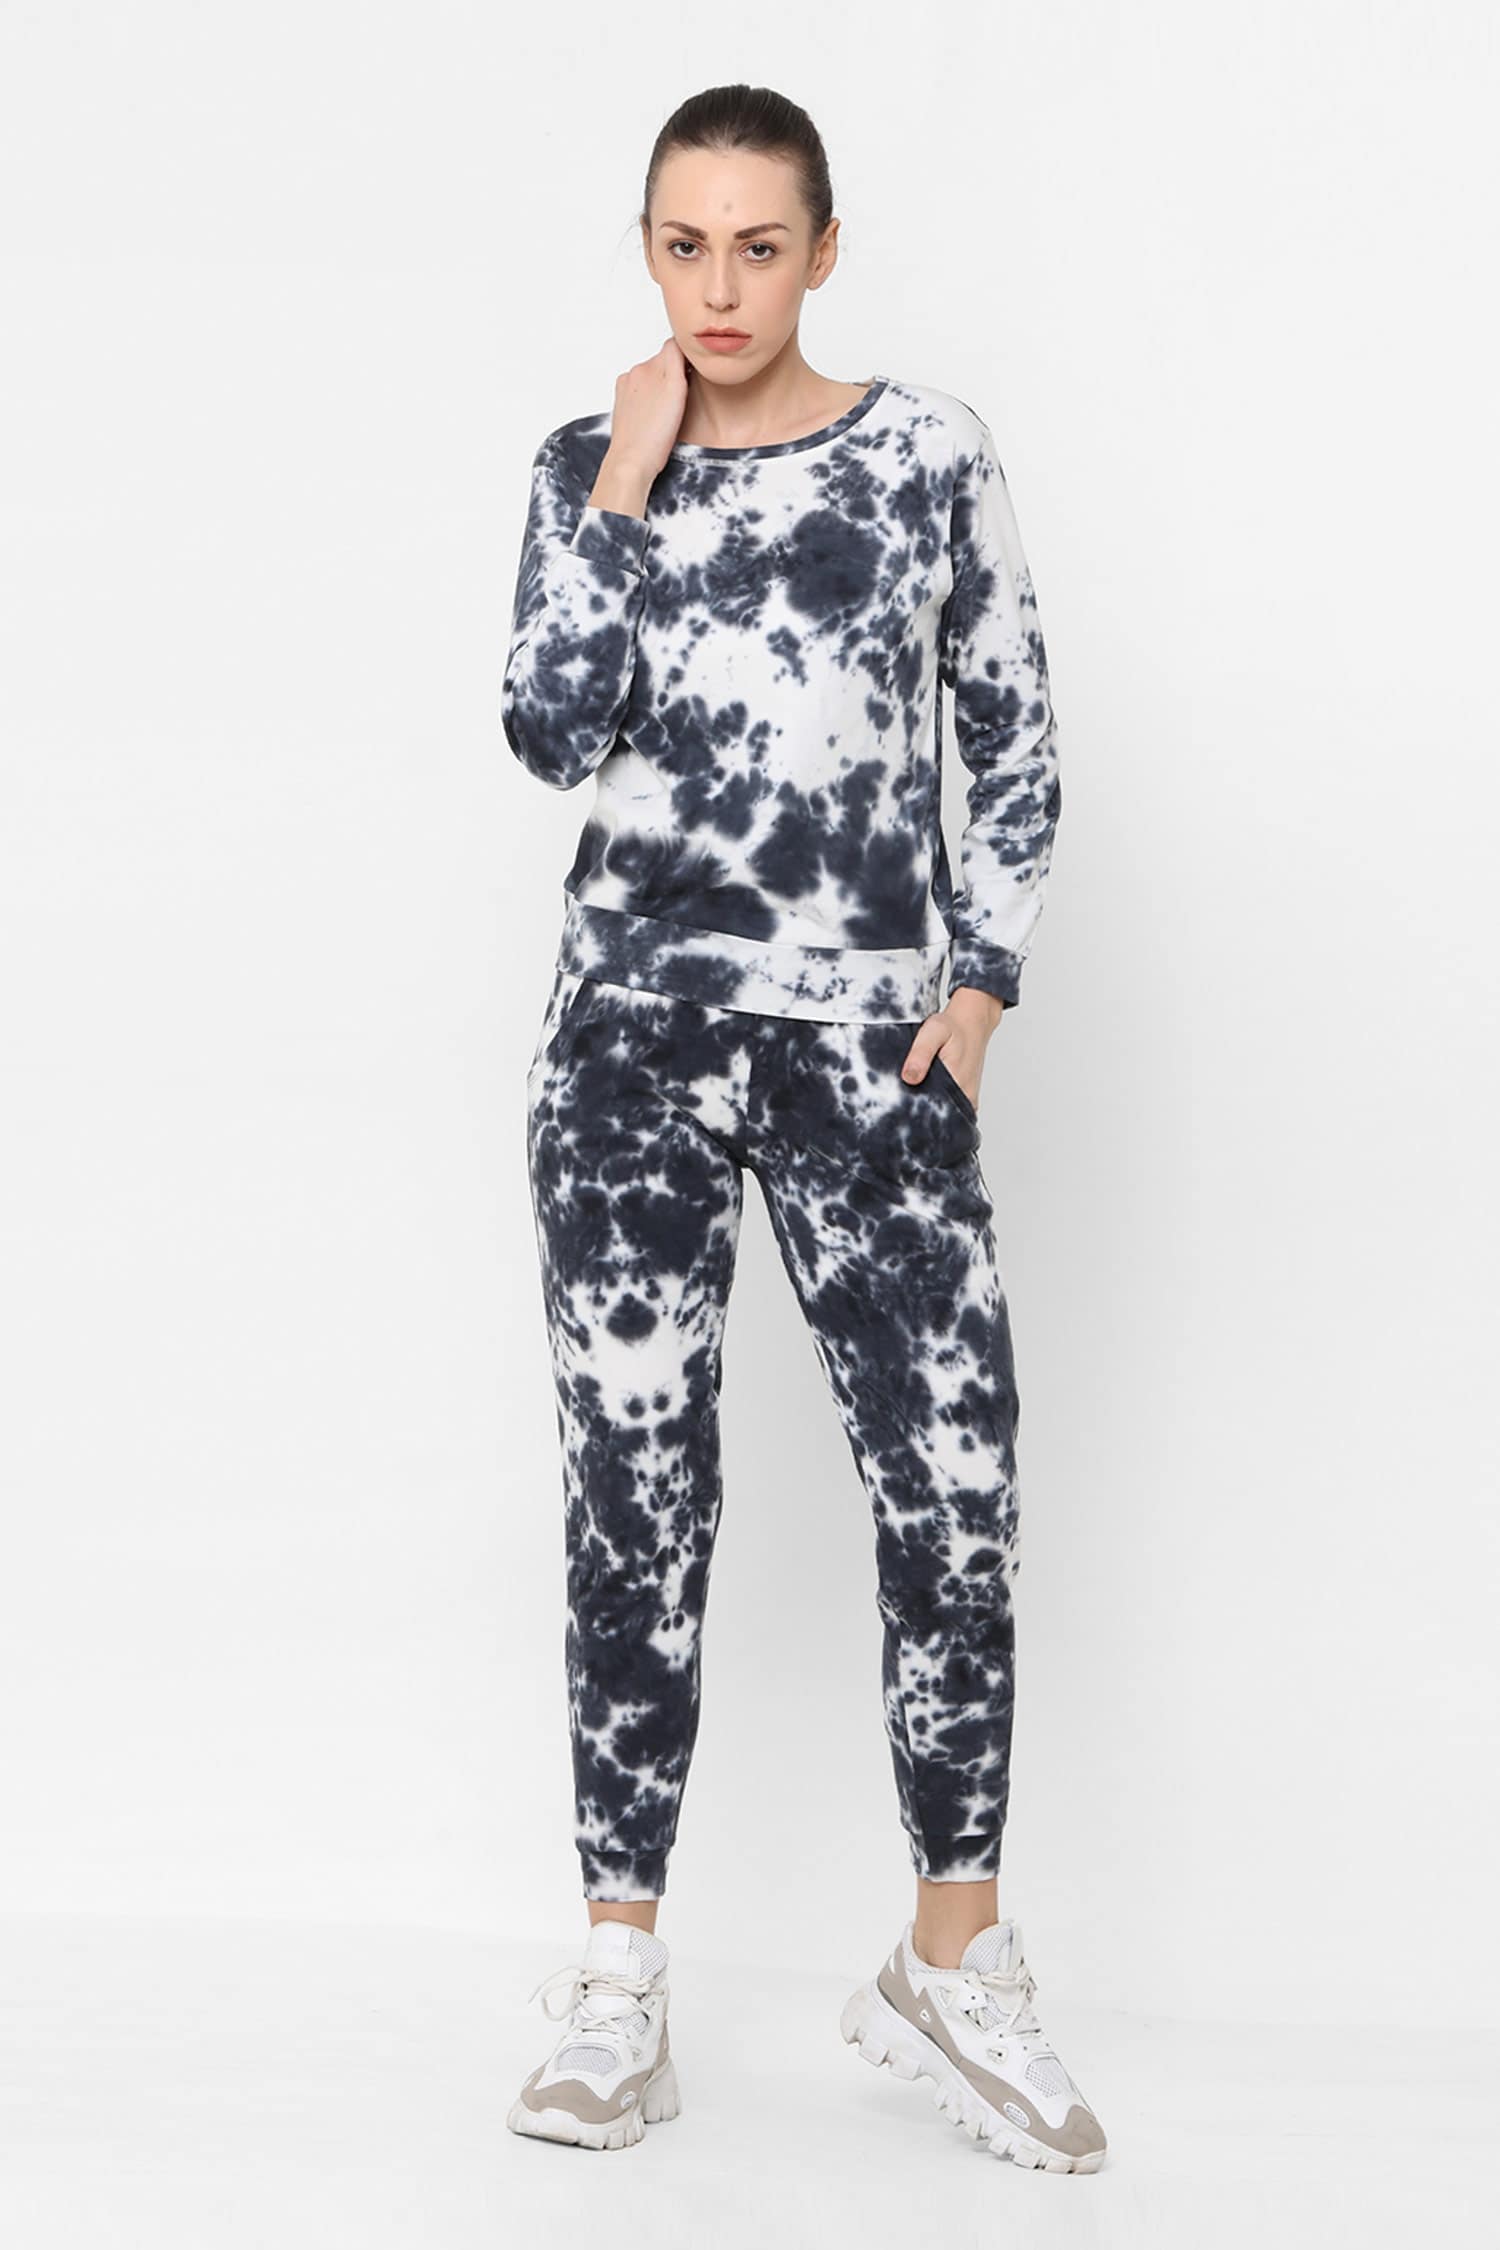 Buy White Cotton Round Tie And Dye Joggers Set For Women by Tuna London -  {Tuna Active} Online at Aza Fashions.